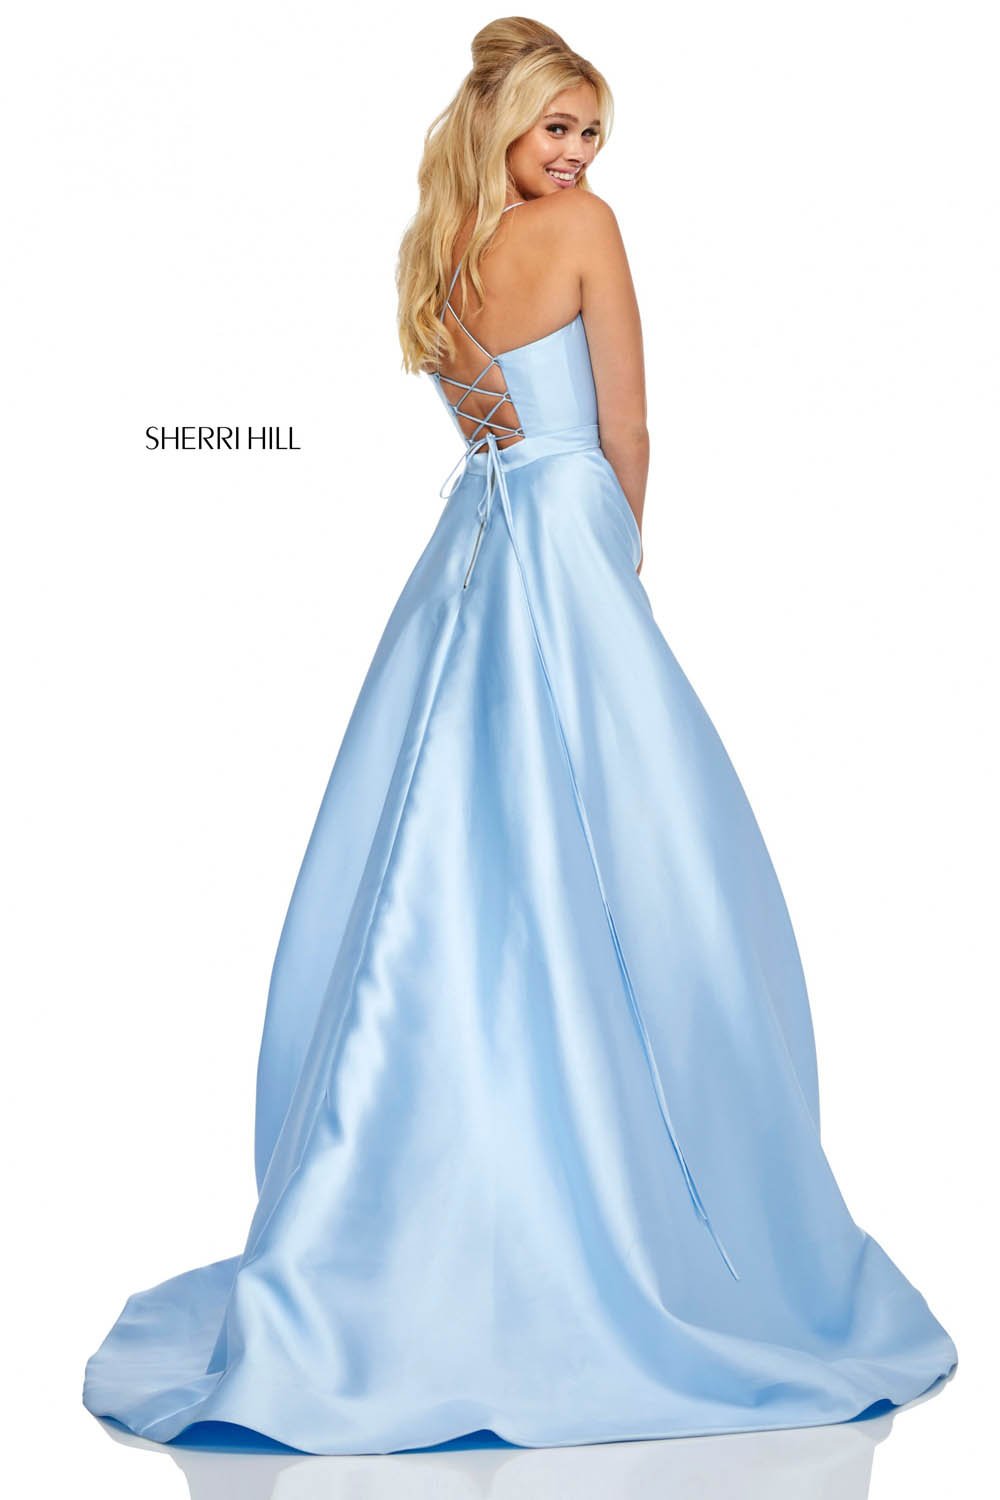 Sherri Hill 52725 dress images in these colors: Lilac, Blush, Yellow, Red, Black, Light Blue.